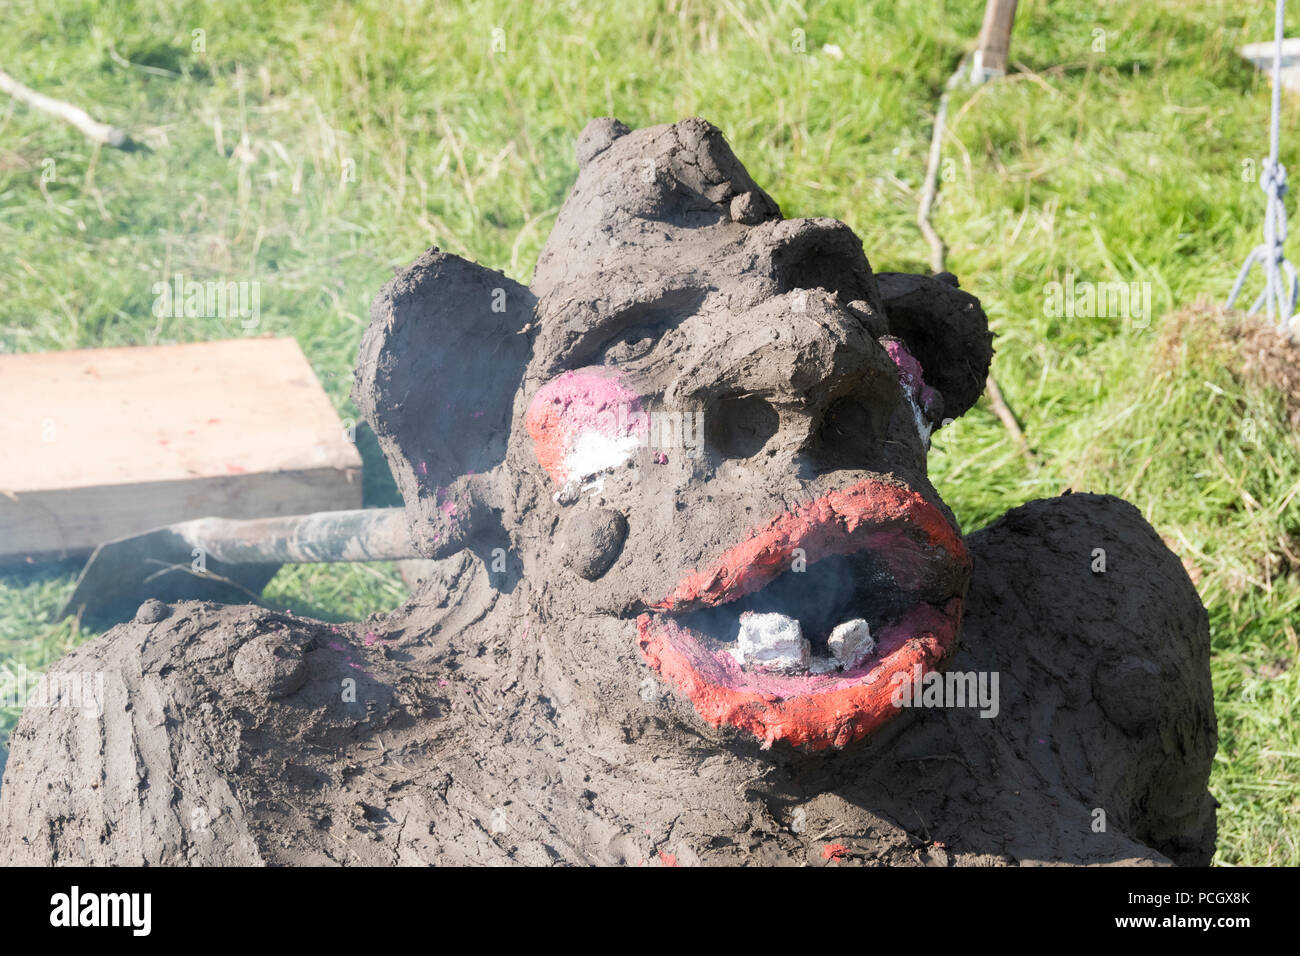 Chepstow, Wales – Aug 14: smoke comes from the mouth of a troll earth oven drying through first bake on 14 Aug 2015 at The Green Gathering Festival Stock Photo